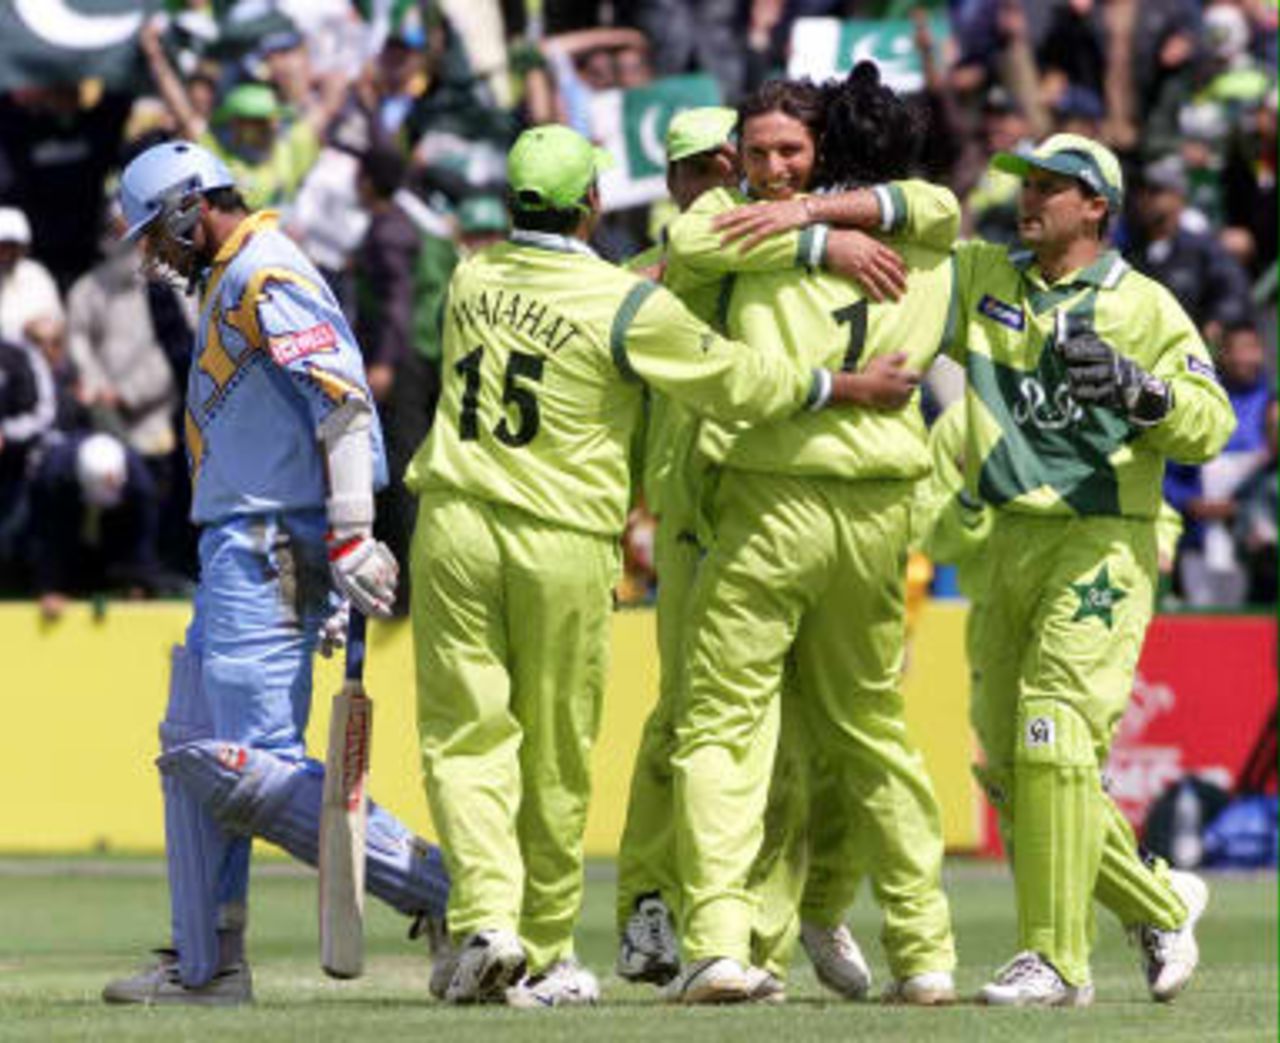 India's Rahul Dravid (L) walks to the pavilion as team mates congratulate Wasim Akram 08 June 99 during their Cricket World Cup match at Old Trafford, Manchester